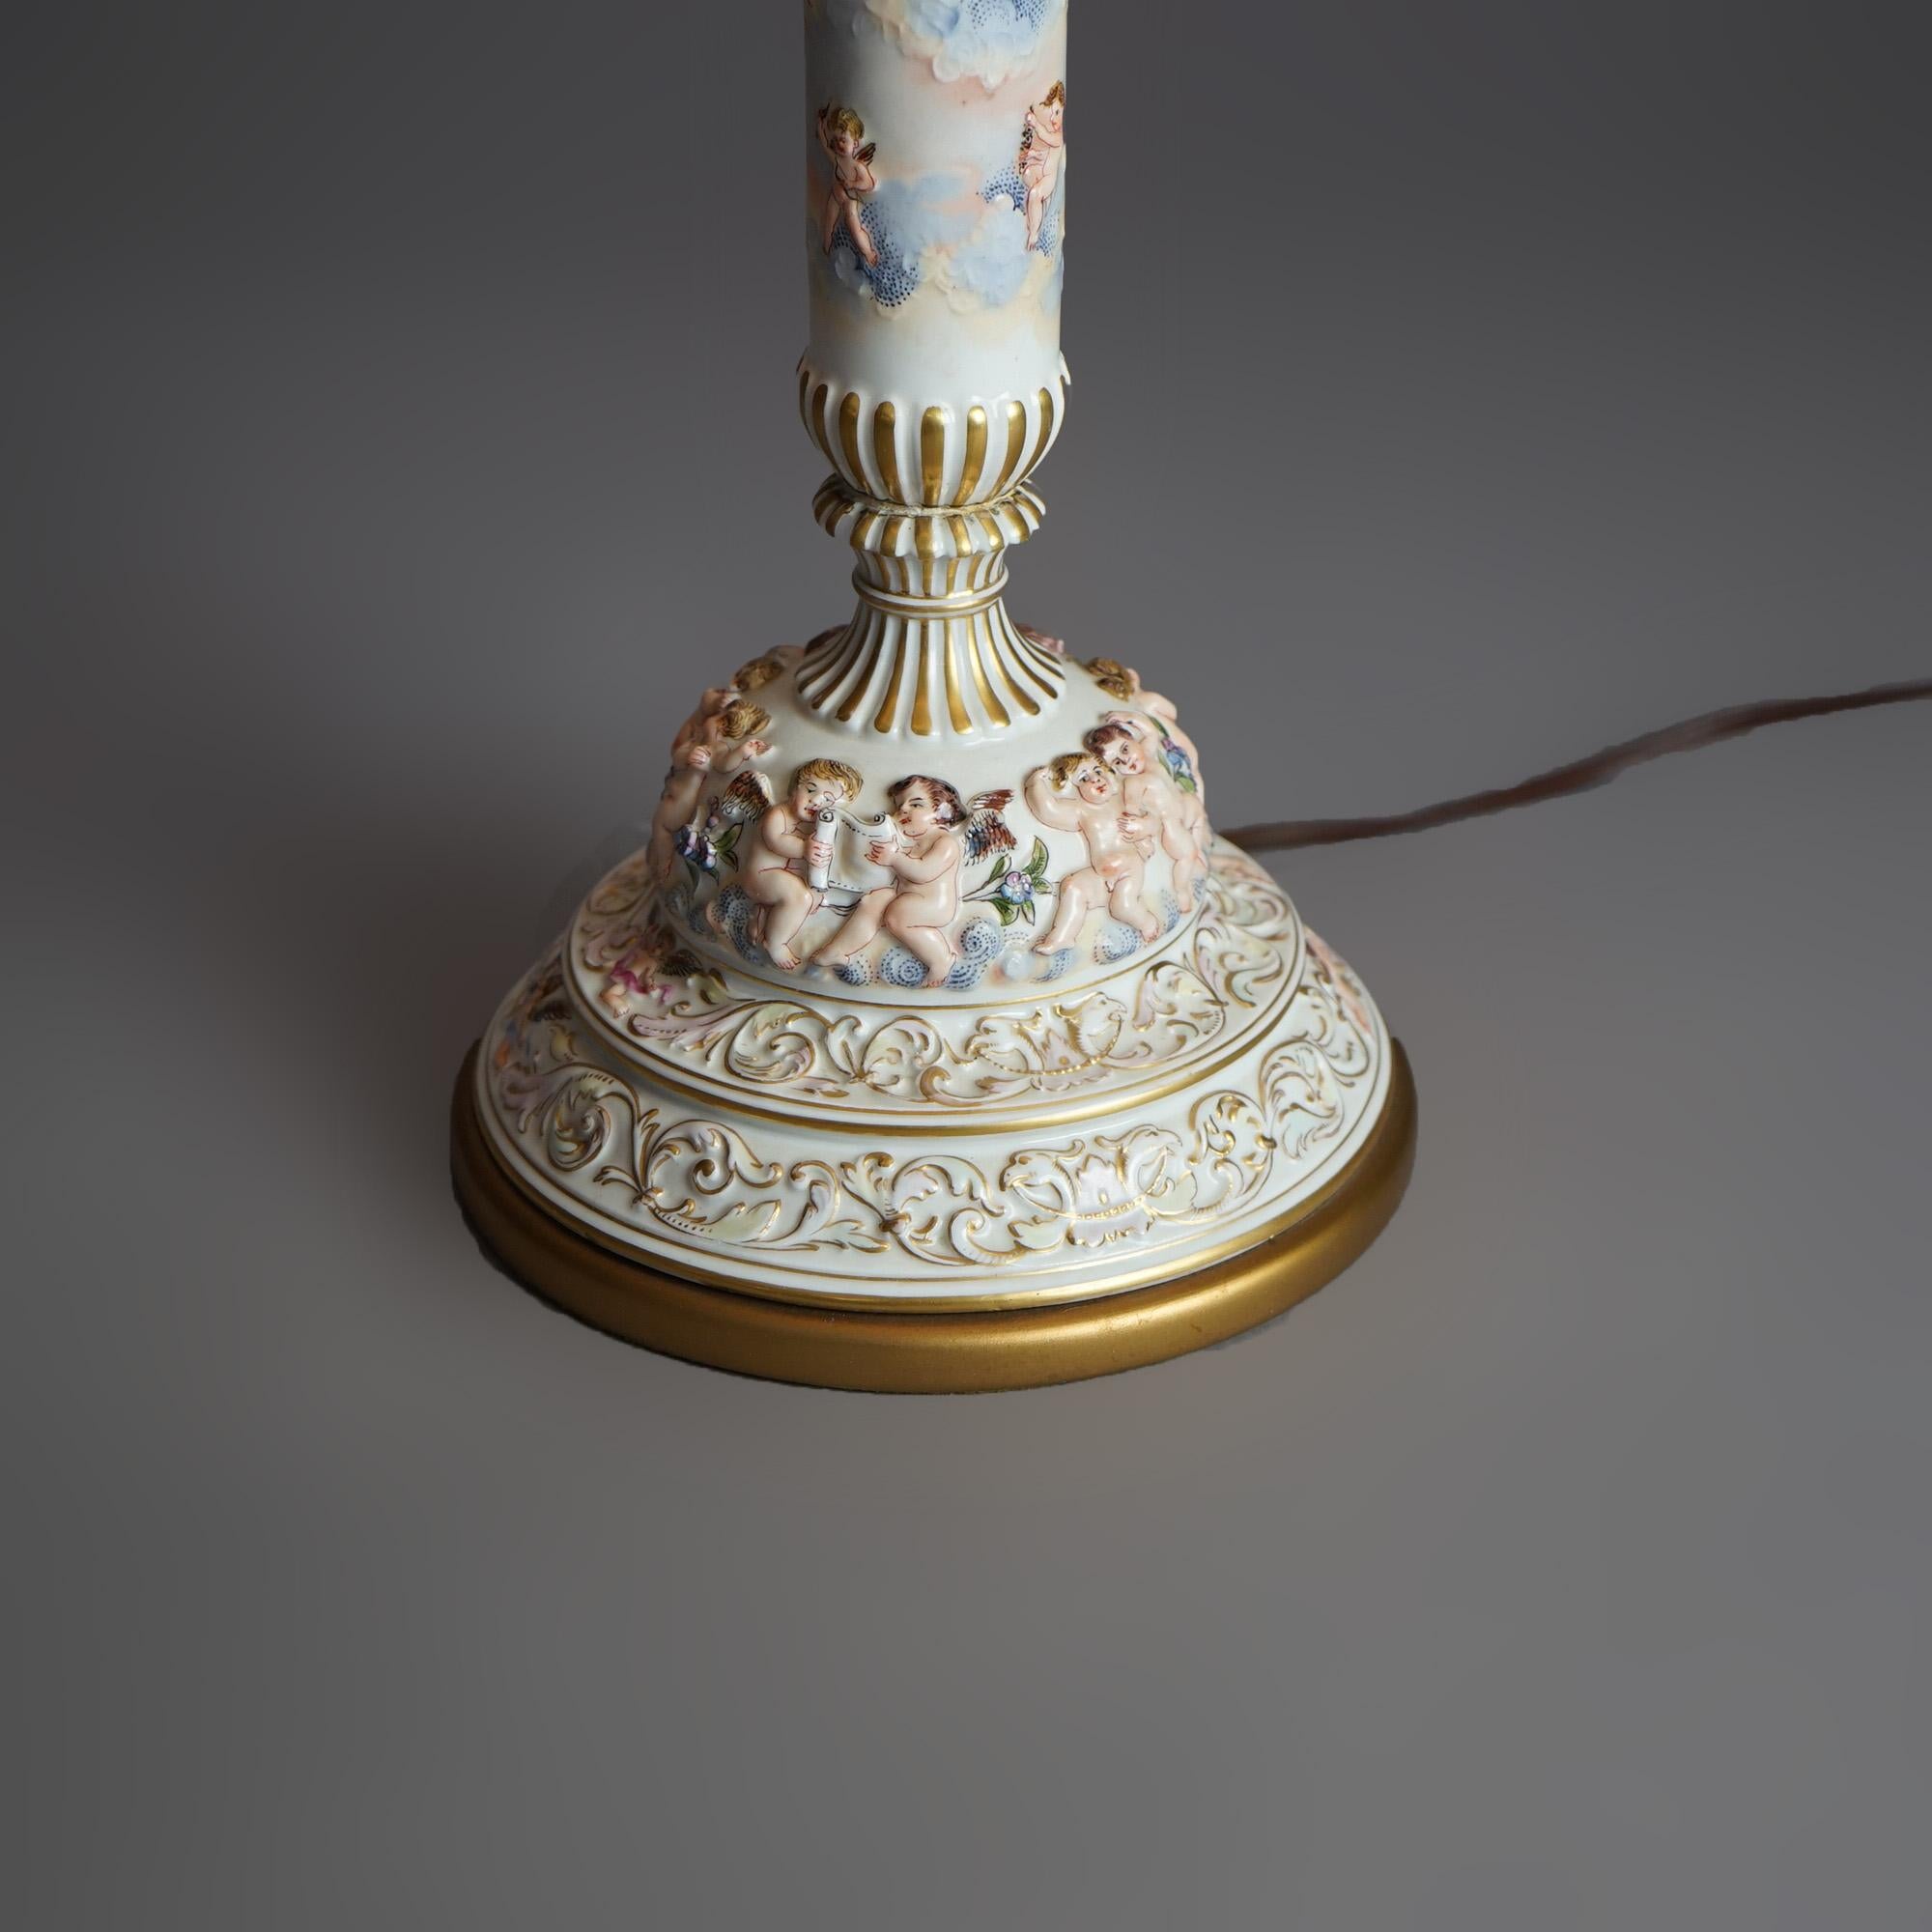 Antique Classical Italian Embossed Porcelain Cherub Table Lamp, c1920 In Good Condition For Sale In Big Flats, NY